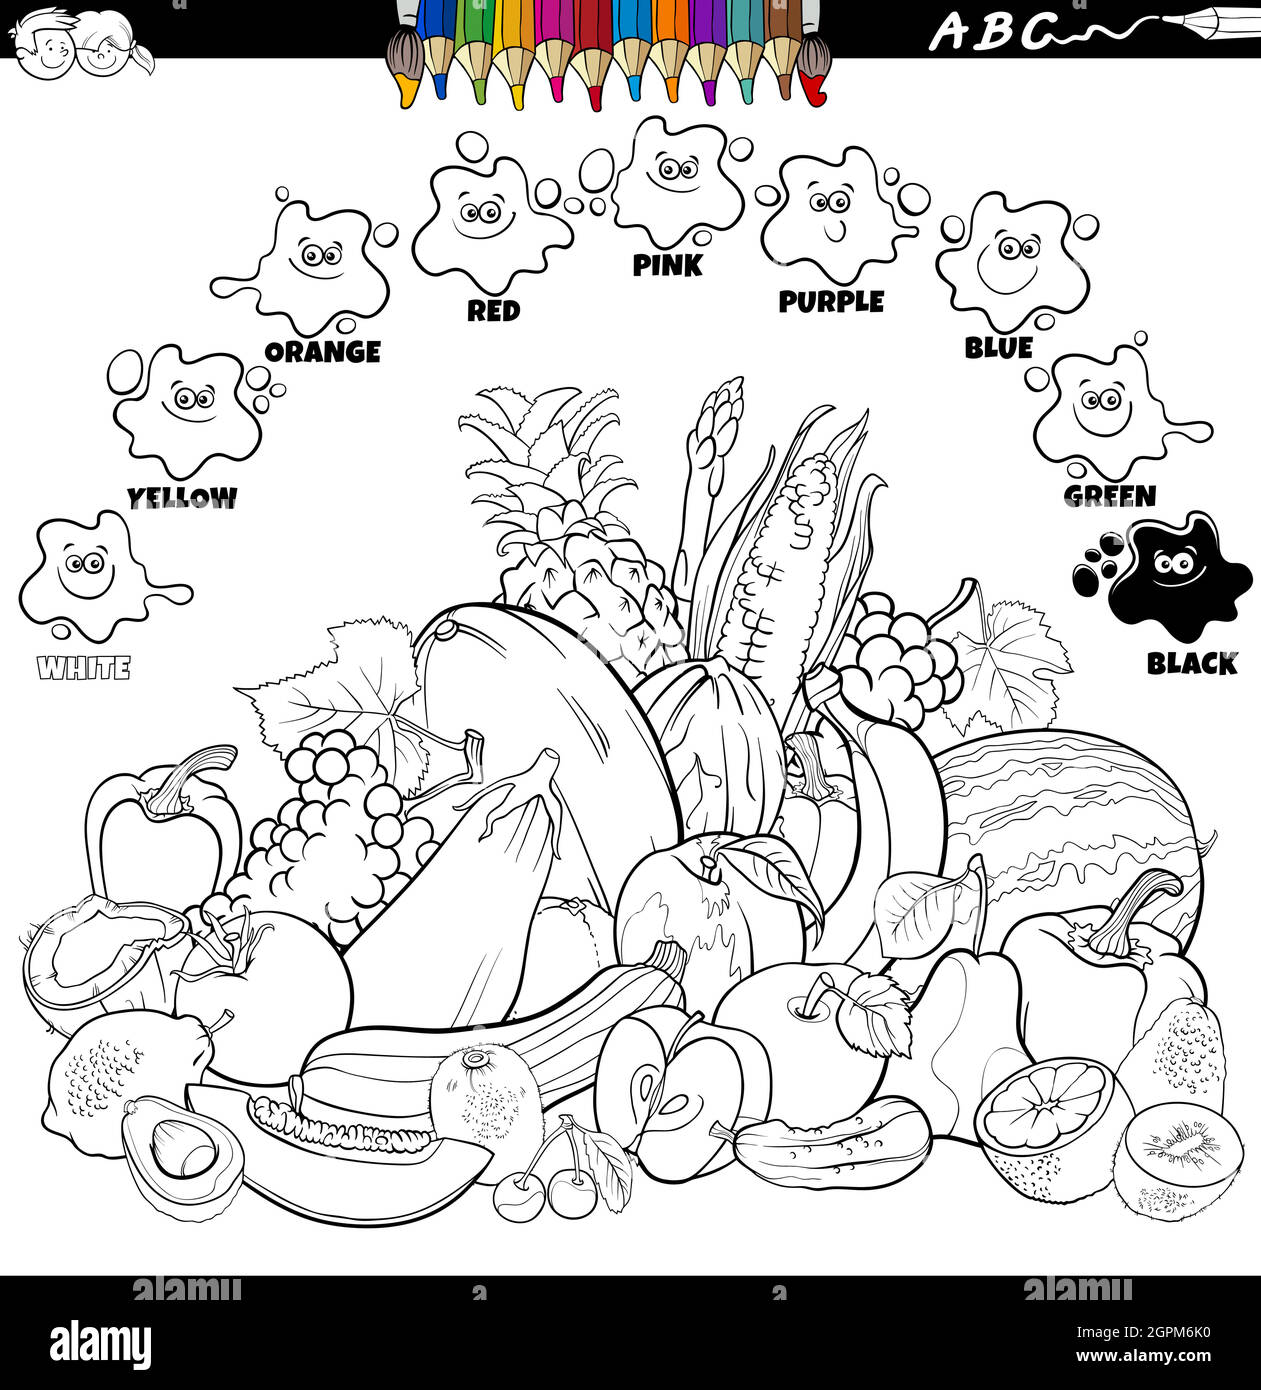 Free Printable Colouring Pages and Sheets for Kids | FirstCry Parenting